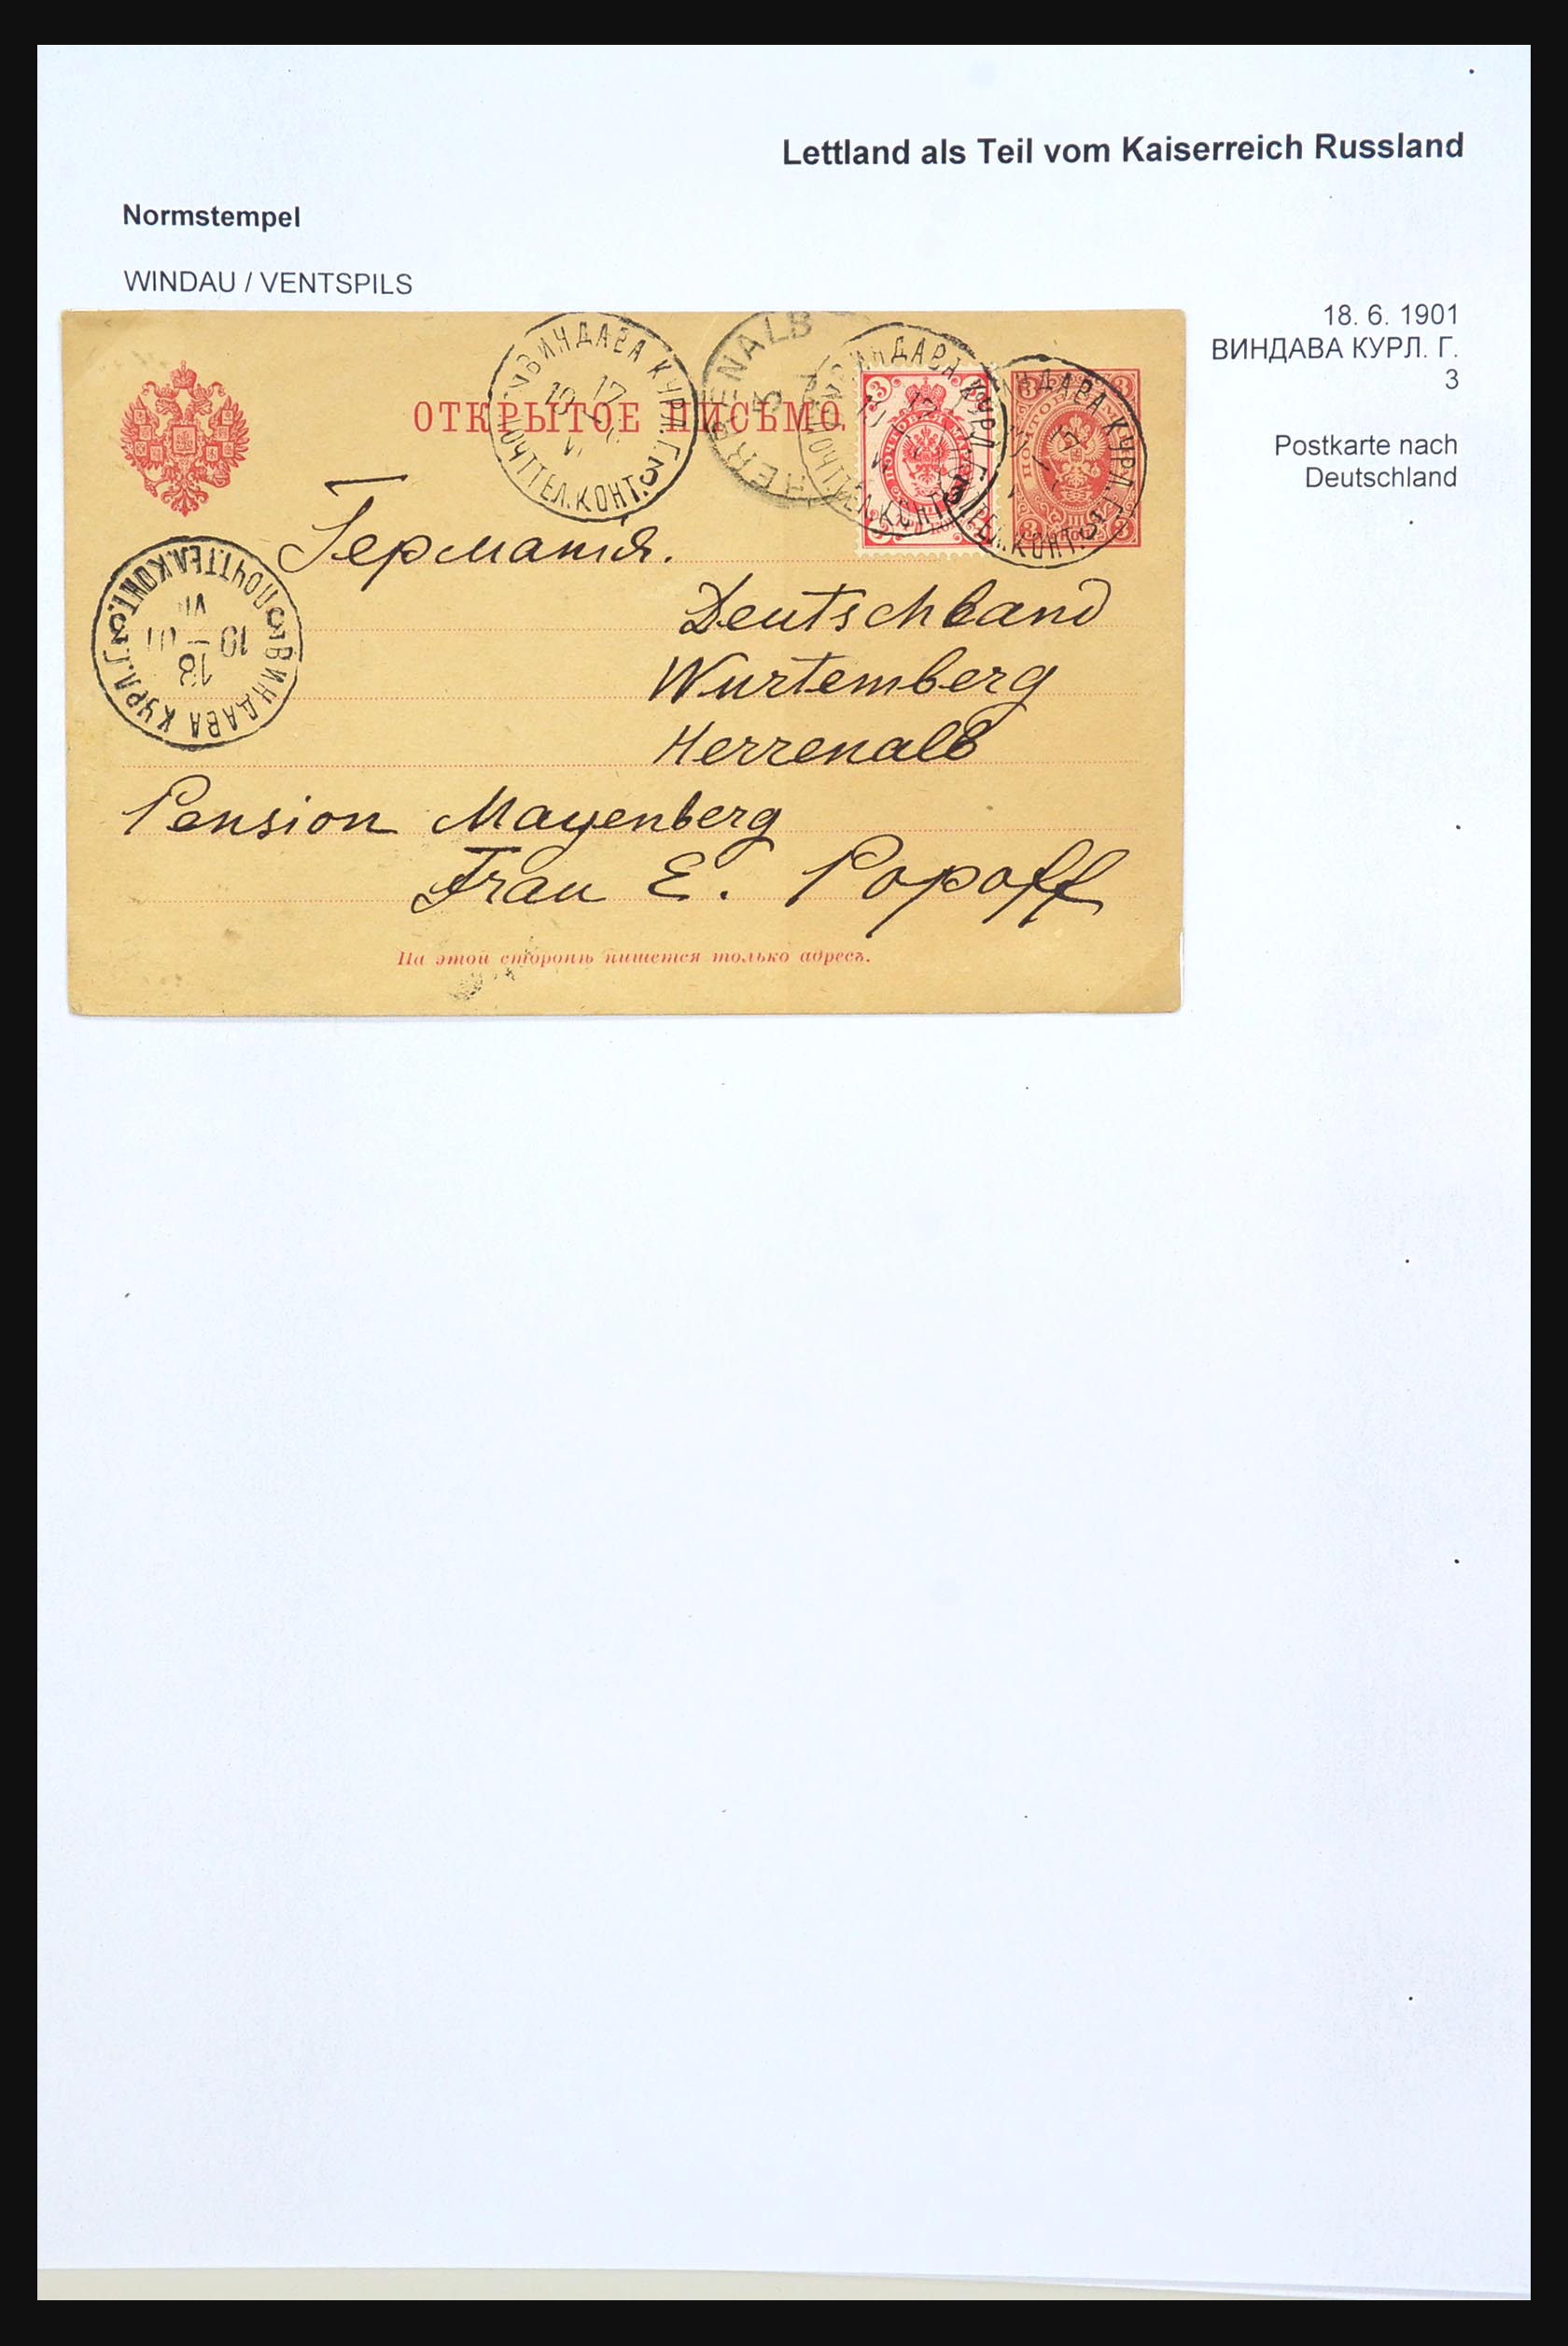 31305 122 - 31305 Latvia as part of Russia 1817-1918.